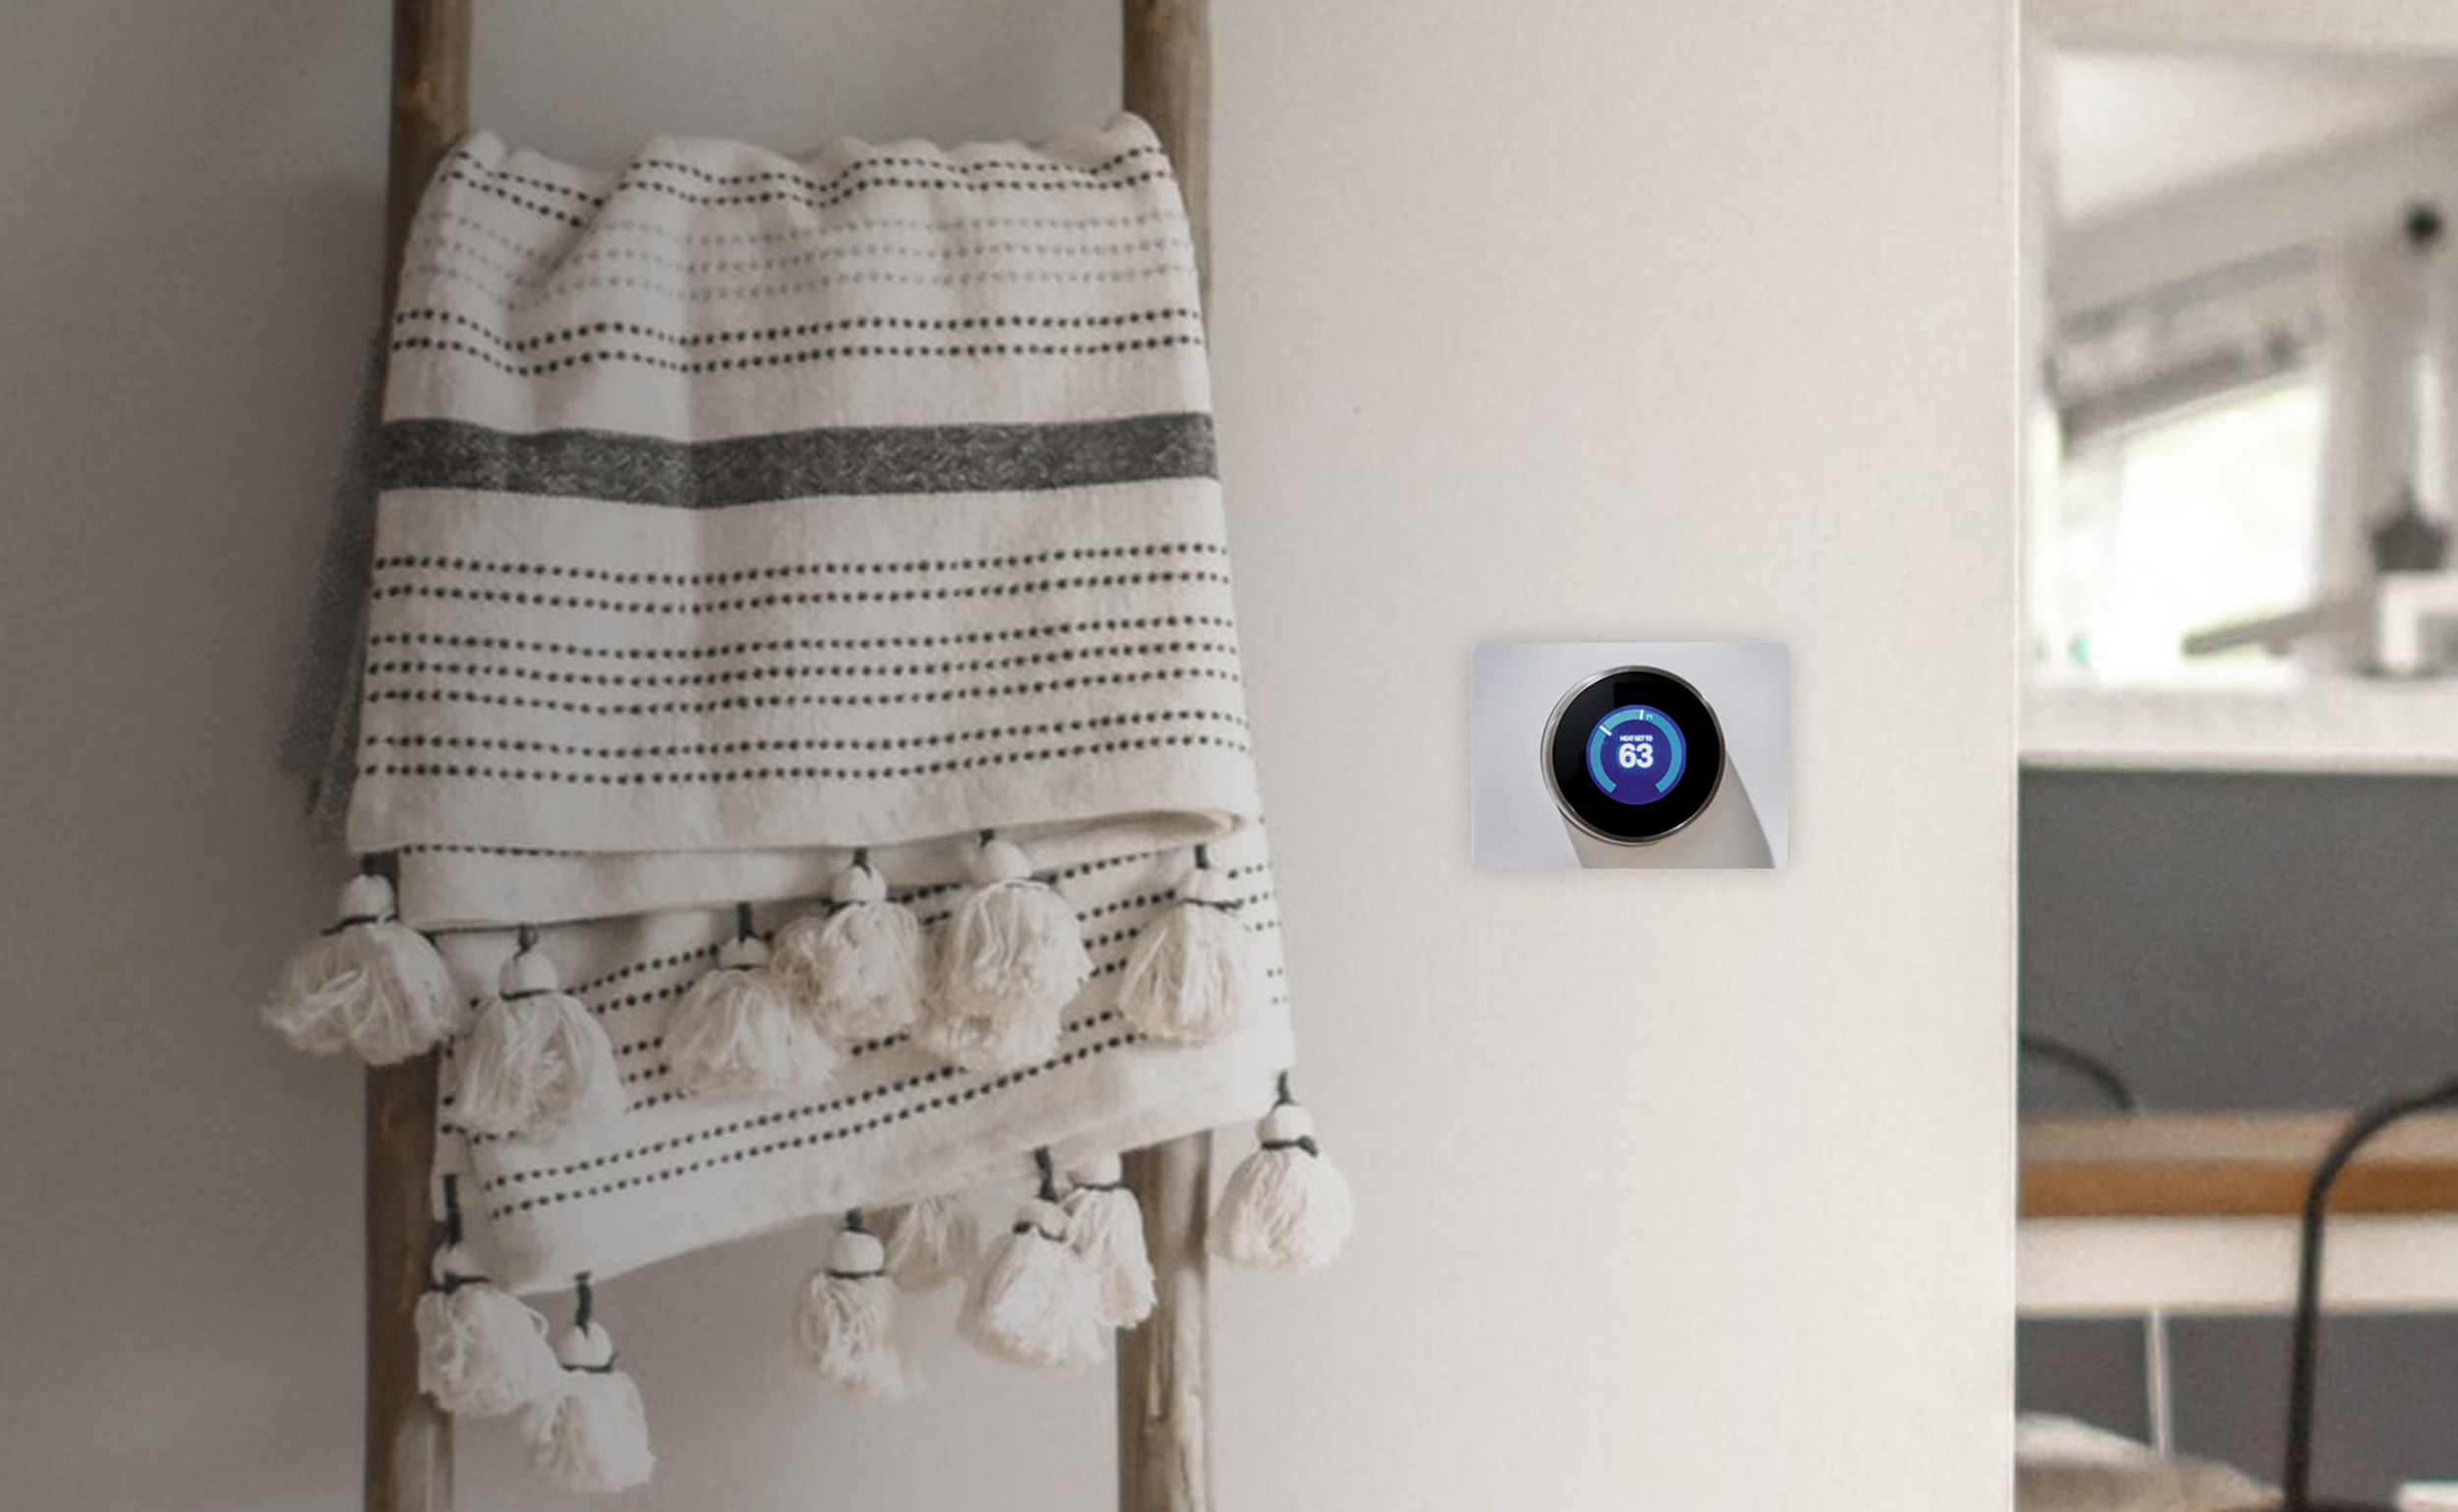 LA smart home air conditioning Nest Thermostat Los Angeles